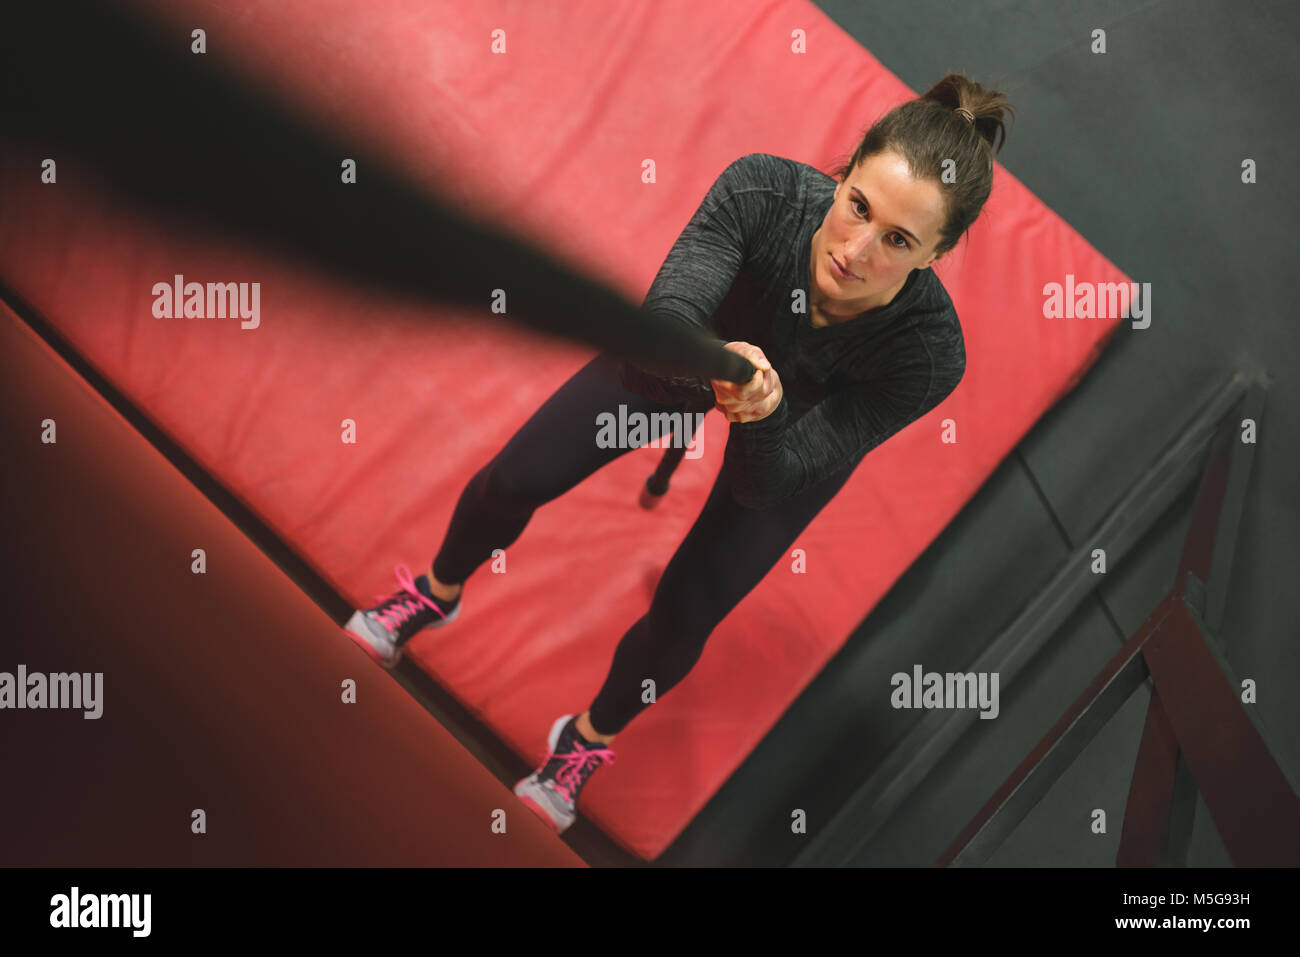 Muscular woman climbing a wall with rope Stock Photo